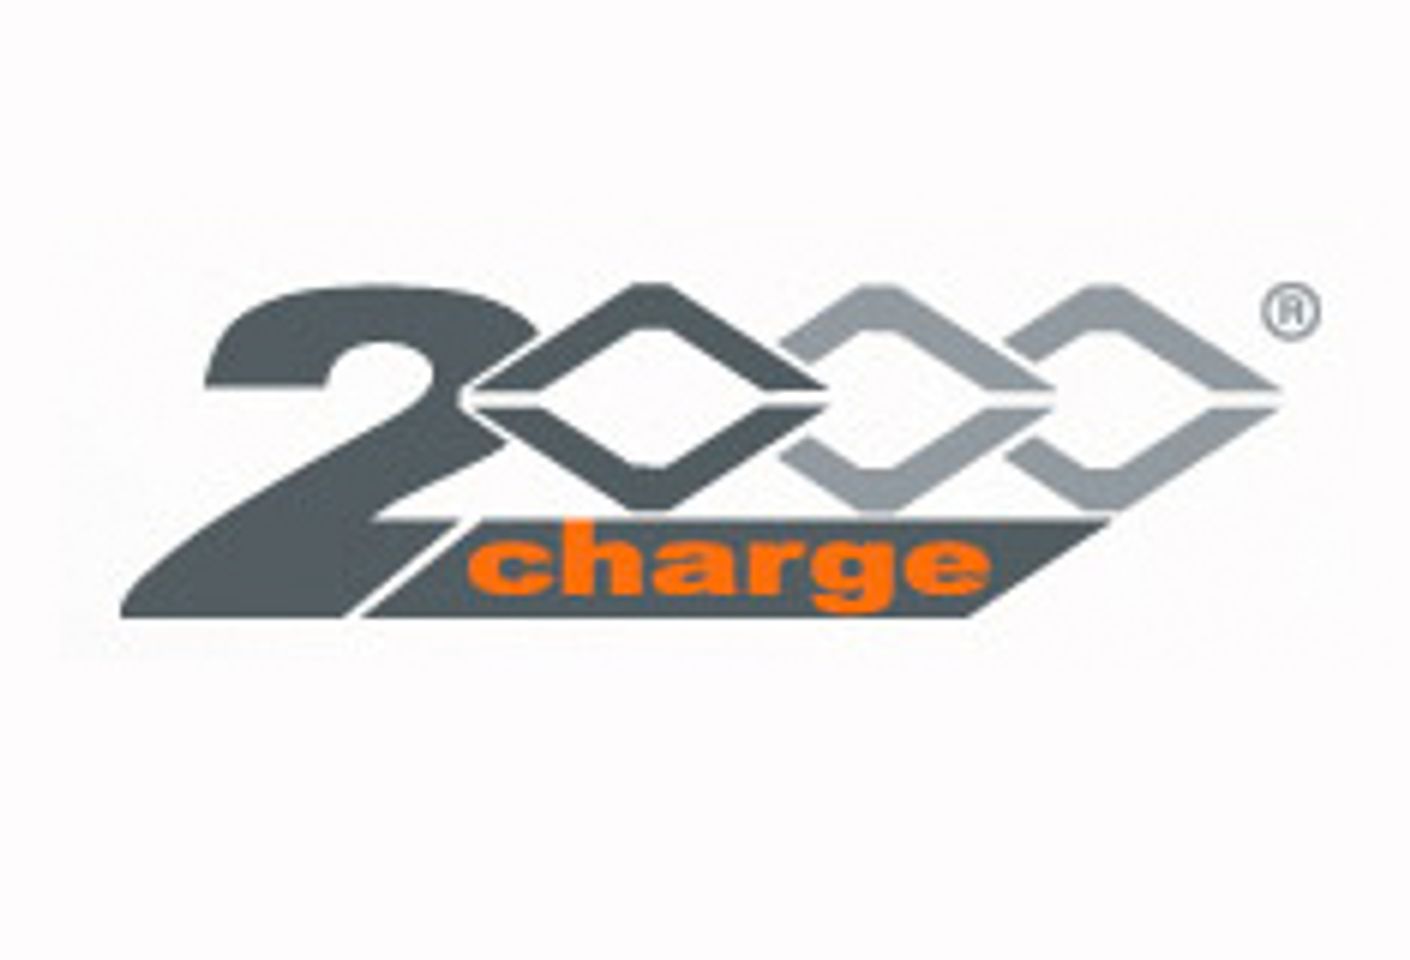 2000 Charge Releases One 'Smart Button' for All Alternative Payment Options